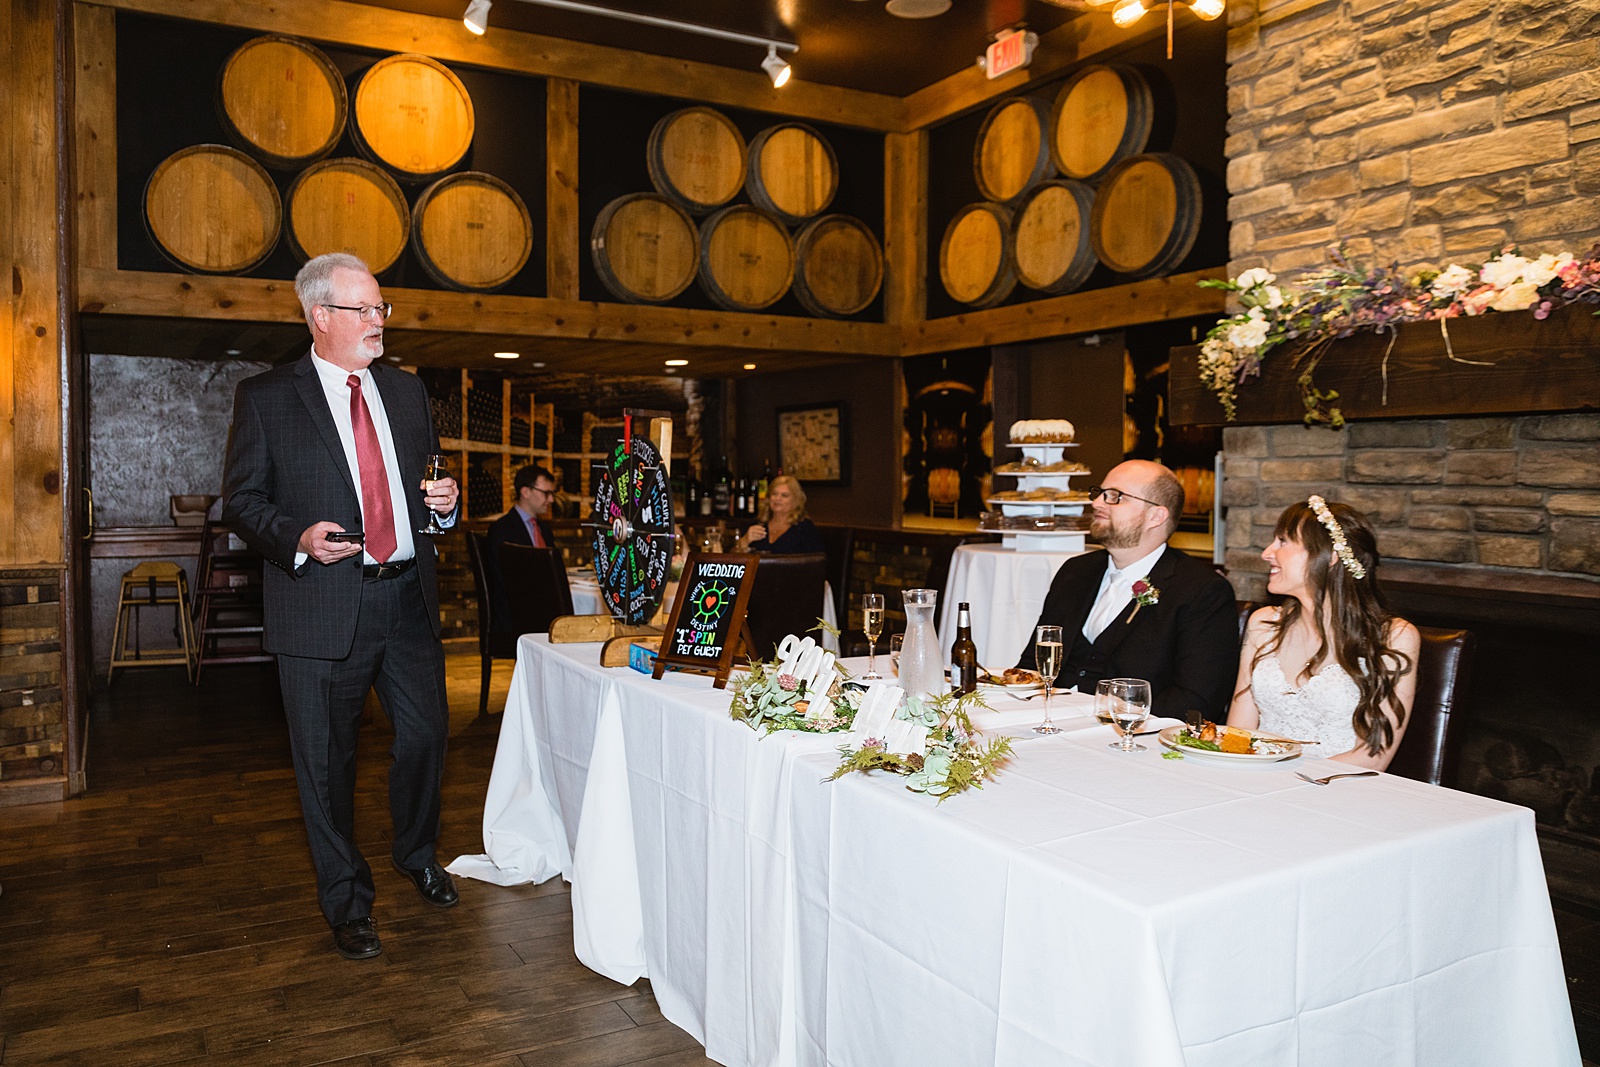 Bride and Groom share a toast with their guests at their Timo Wood Oven Wine Bar wedding reception by Arizona wedding photographer PMA Photography.